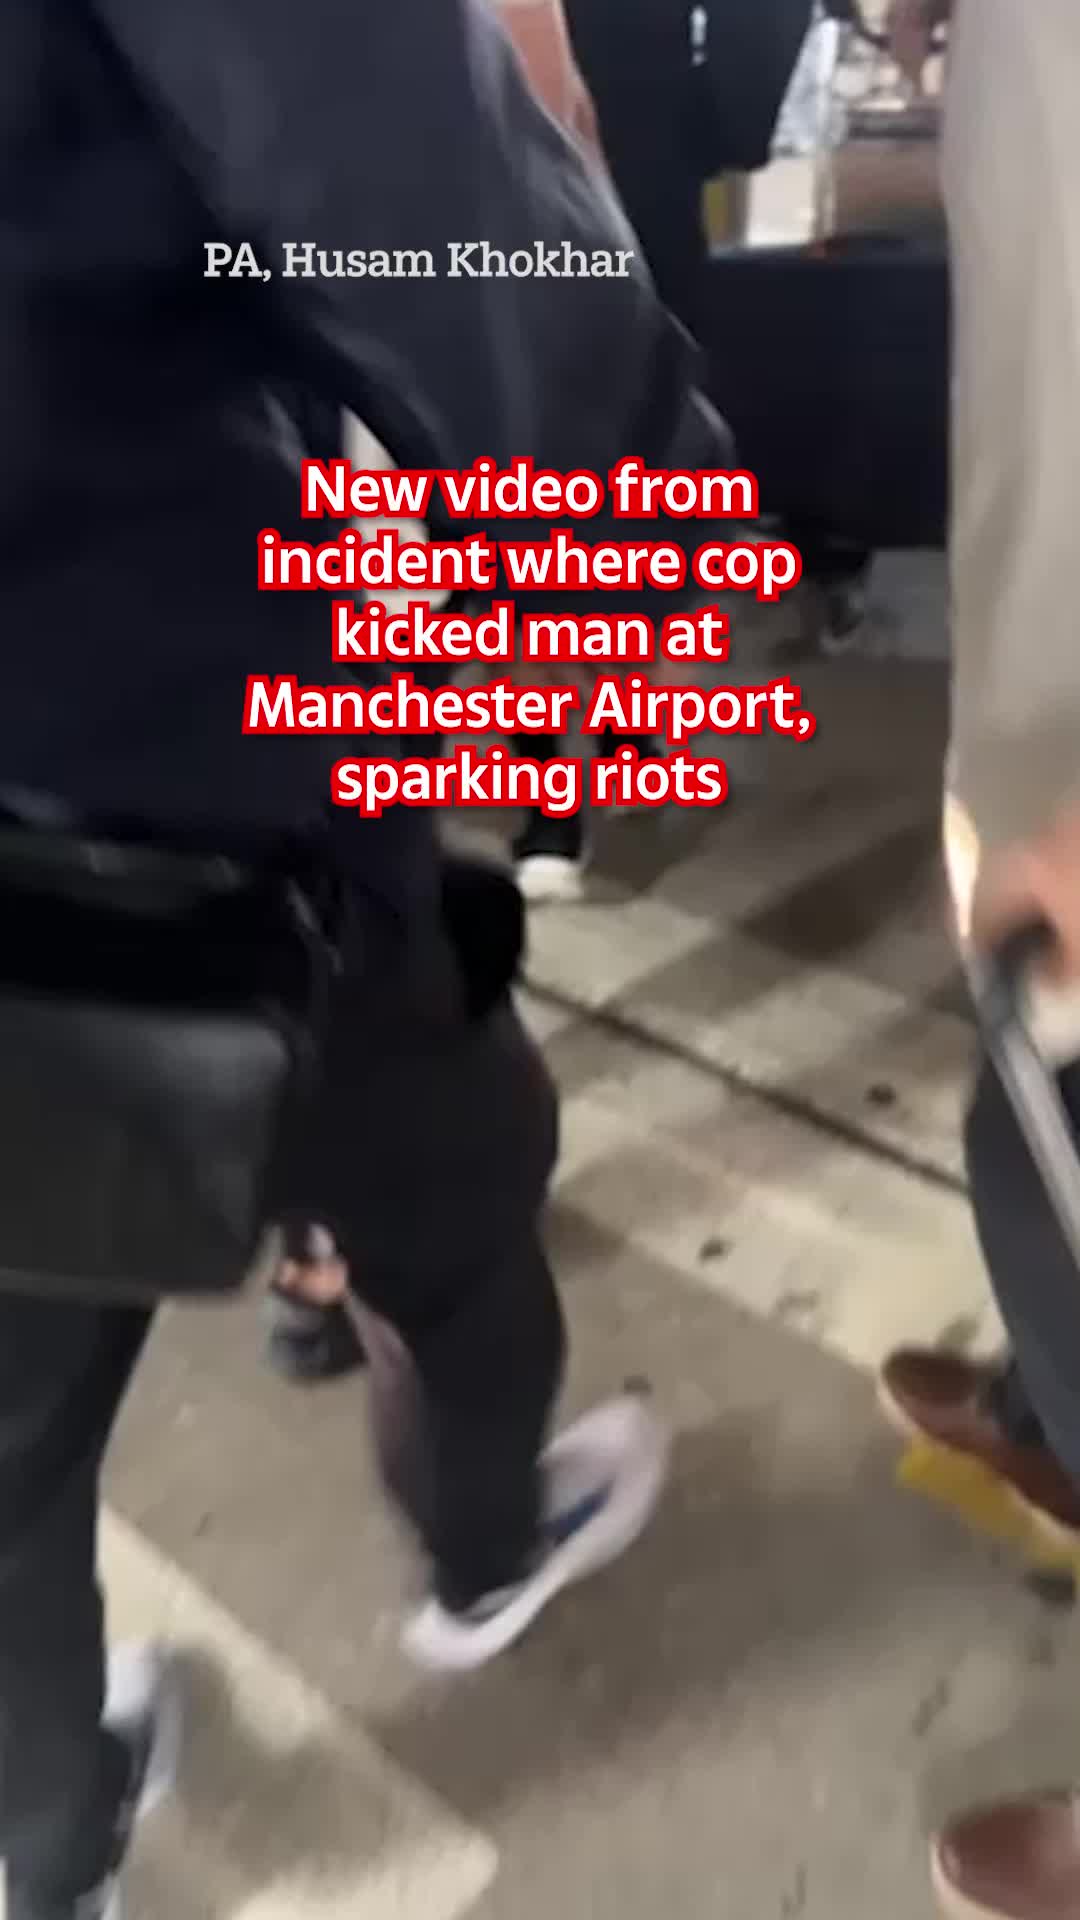 New footage has emerged from the Manchester Airport incident #thesun #news #manchesterairport #manchesterairportincident #uknews